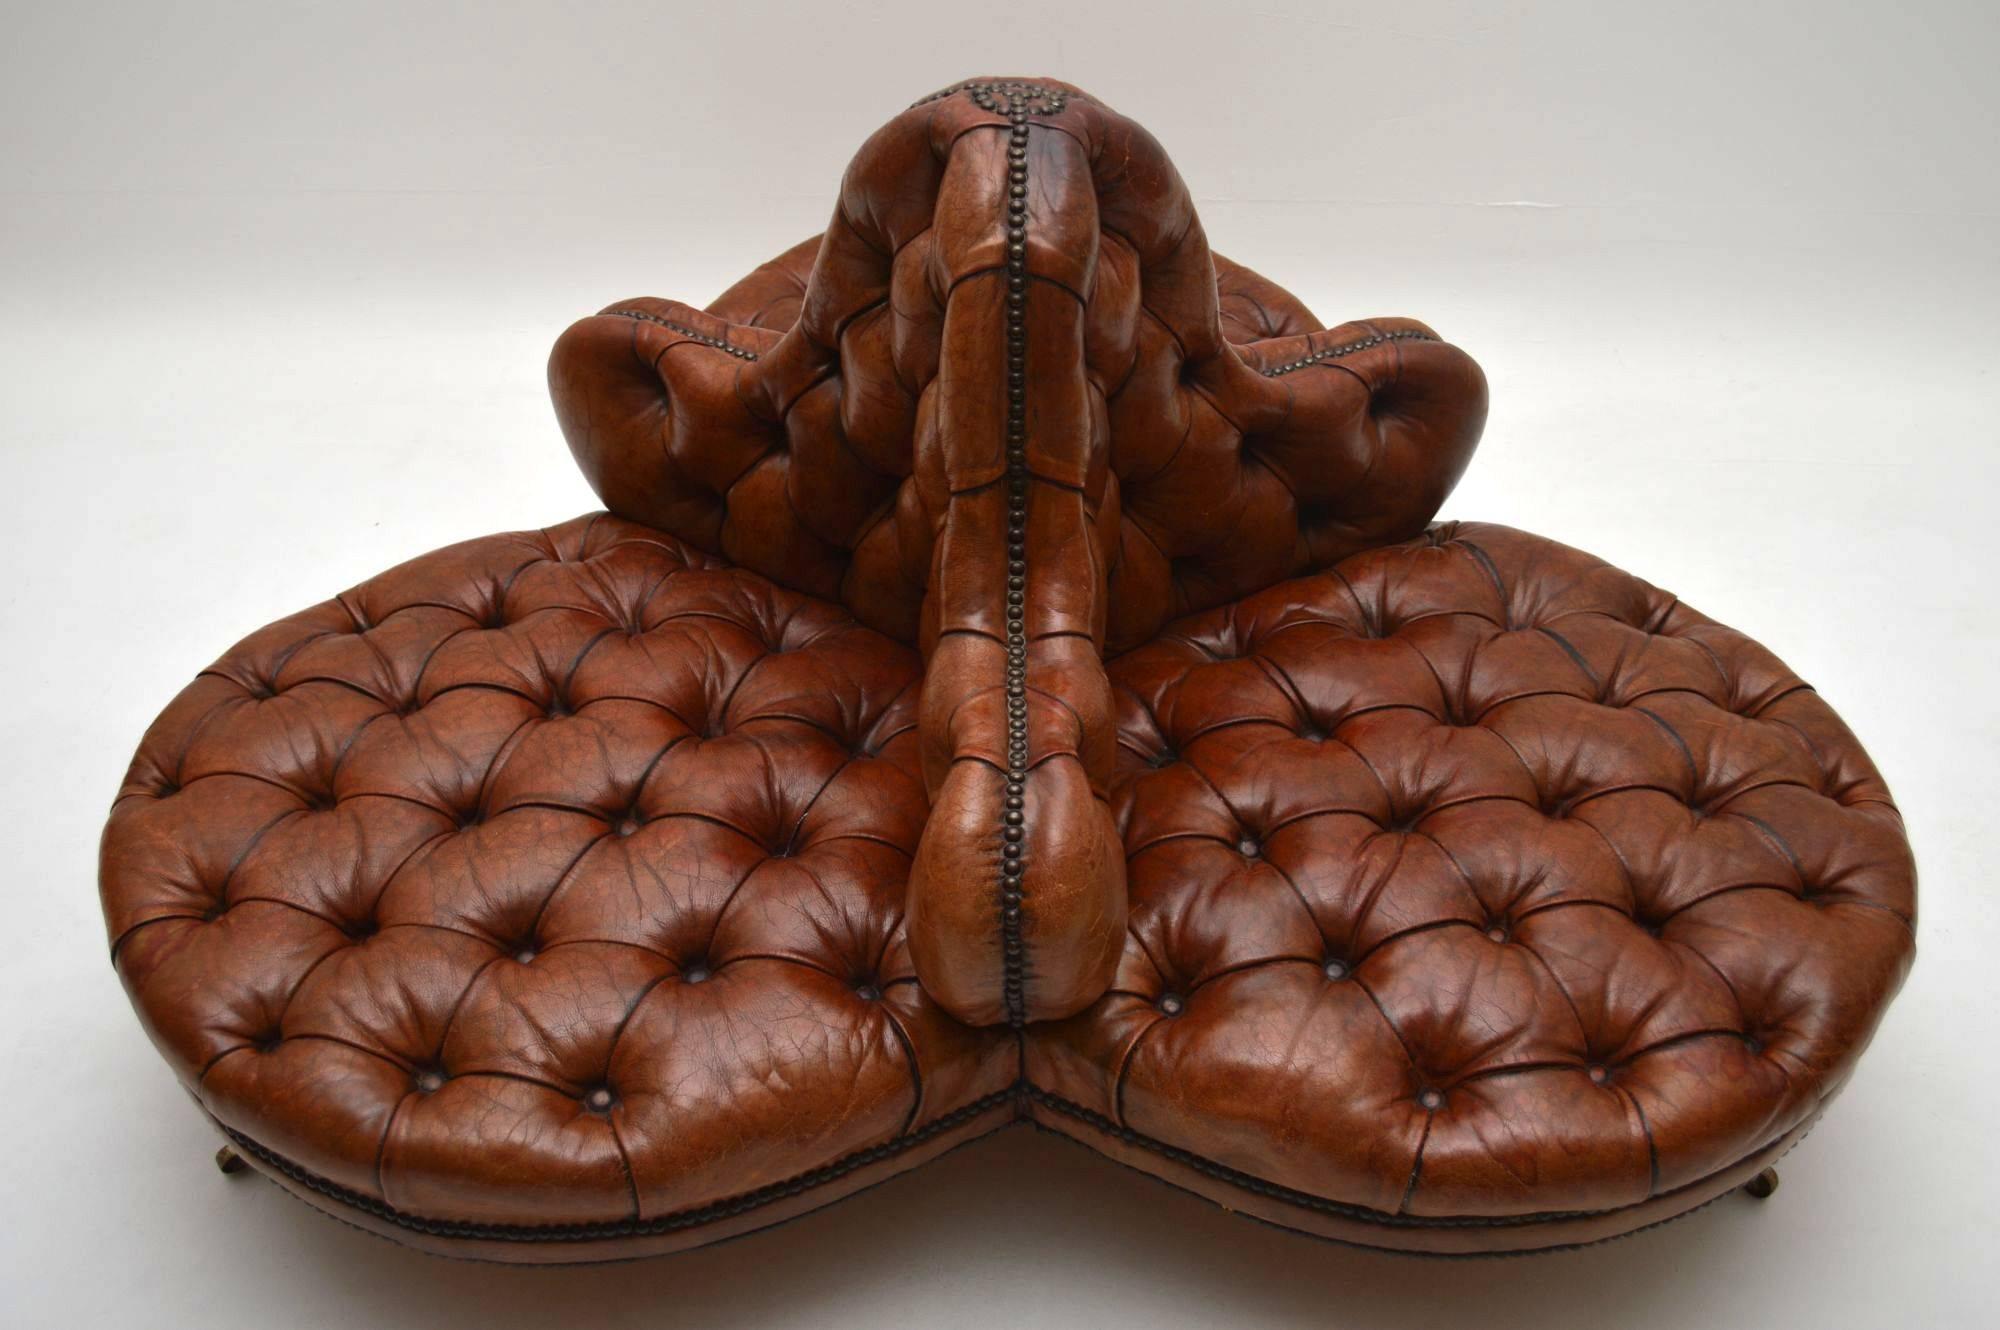 This antique Victorian deep buttoned leather conversation sofa is in good original condition. The leather has a wonderful tan color and is naturally distressed, with normal fading that would be expected for a piece of this age. There are no splits,